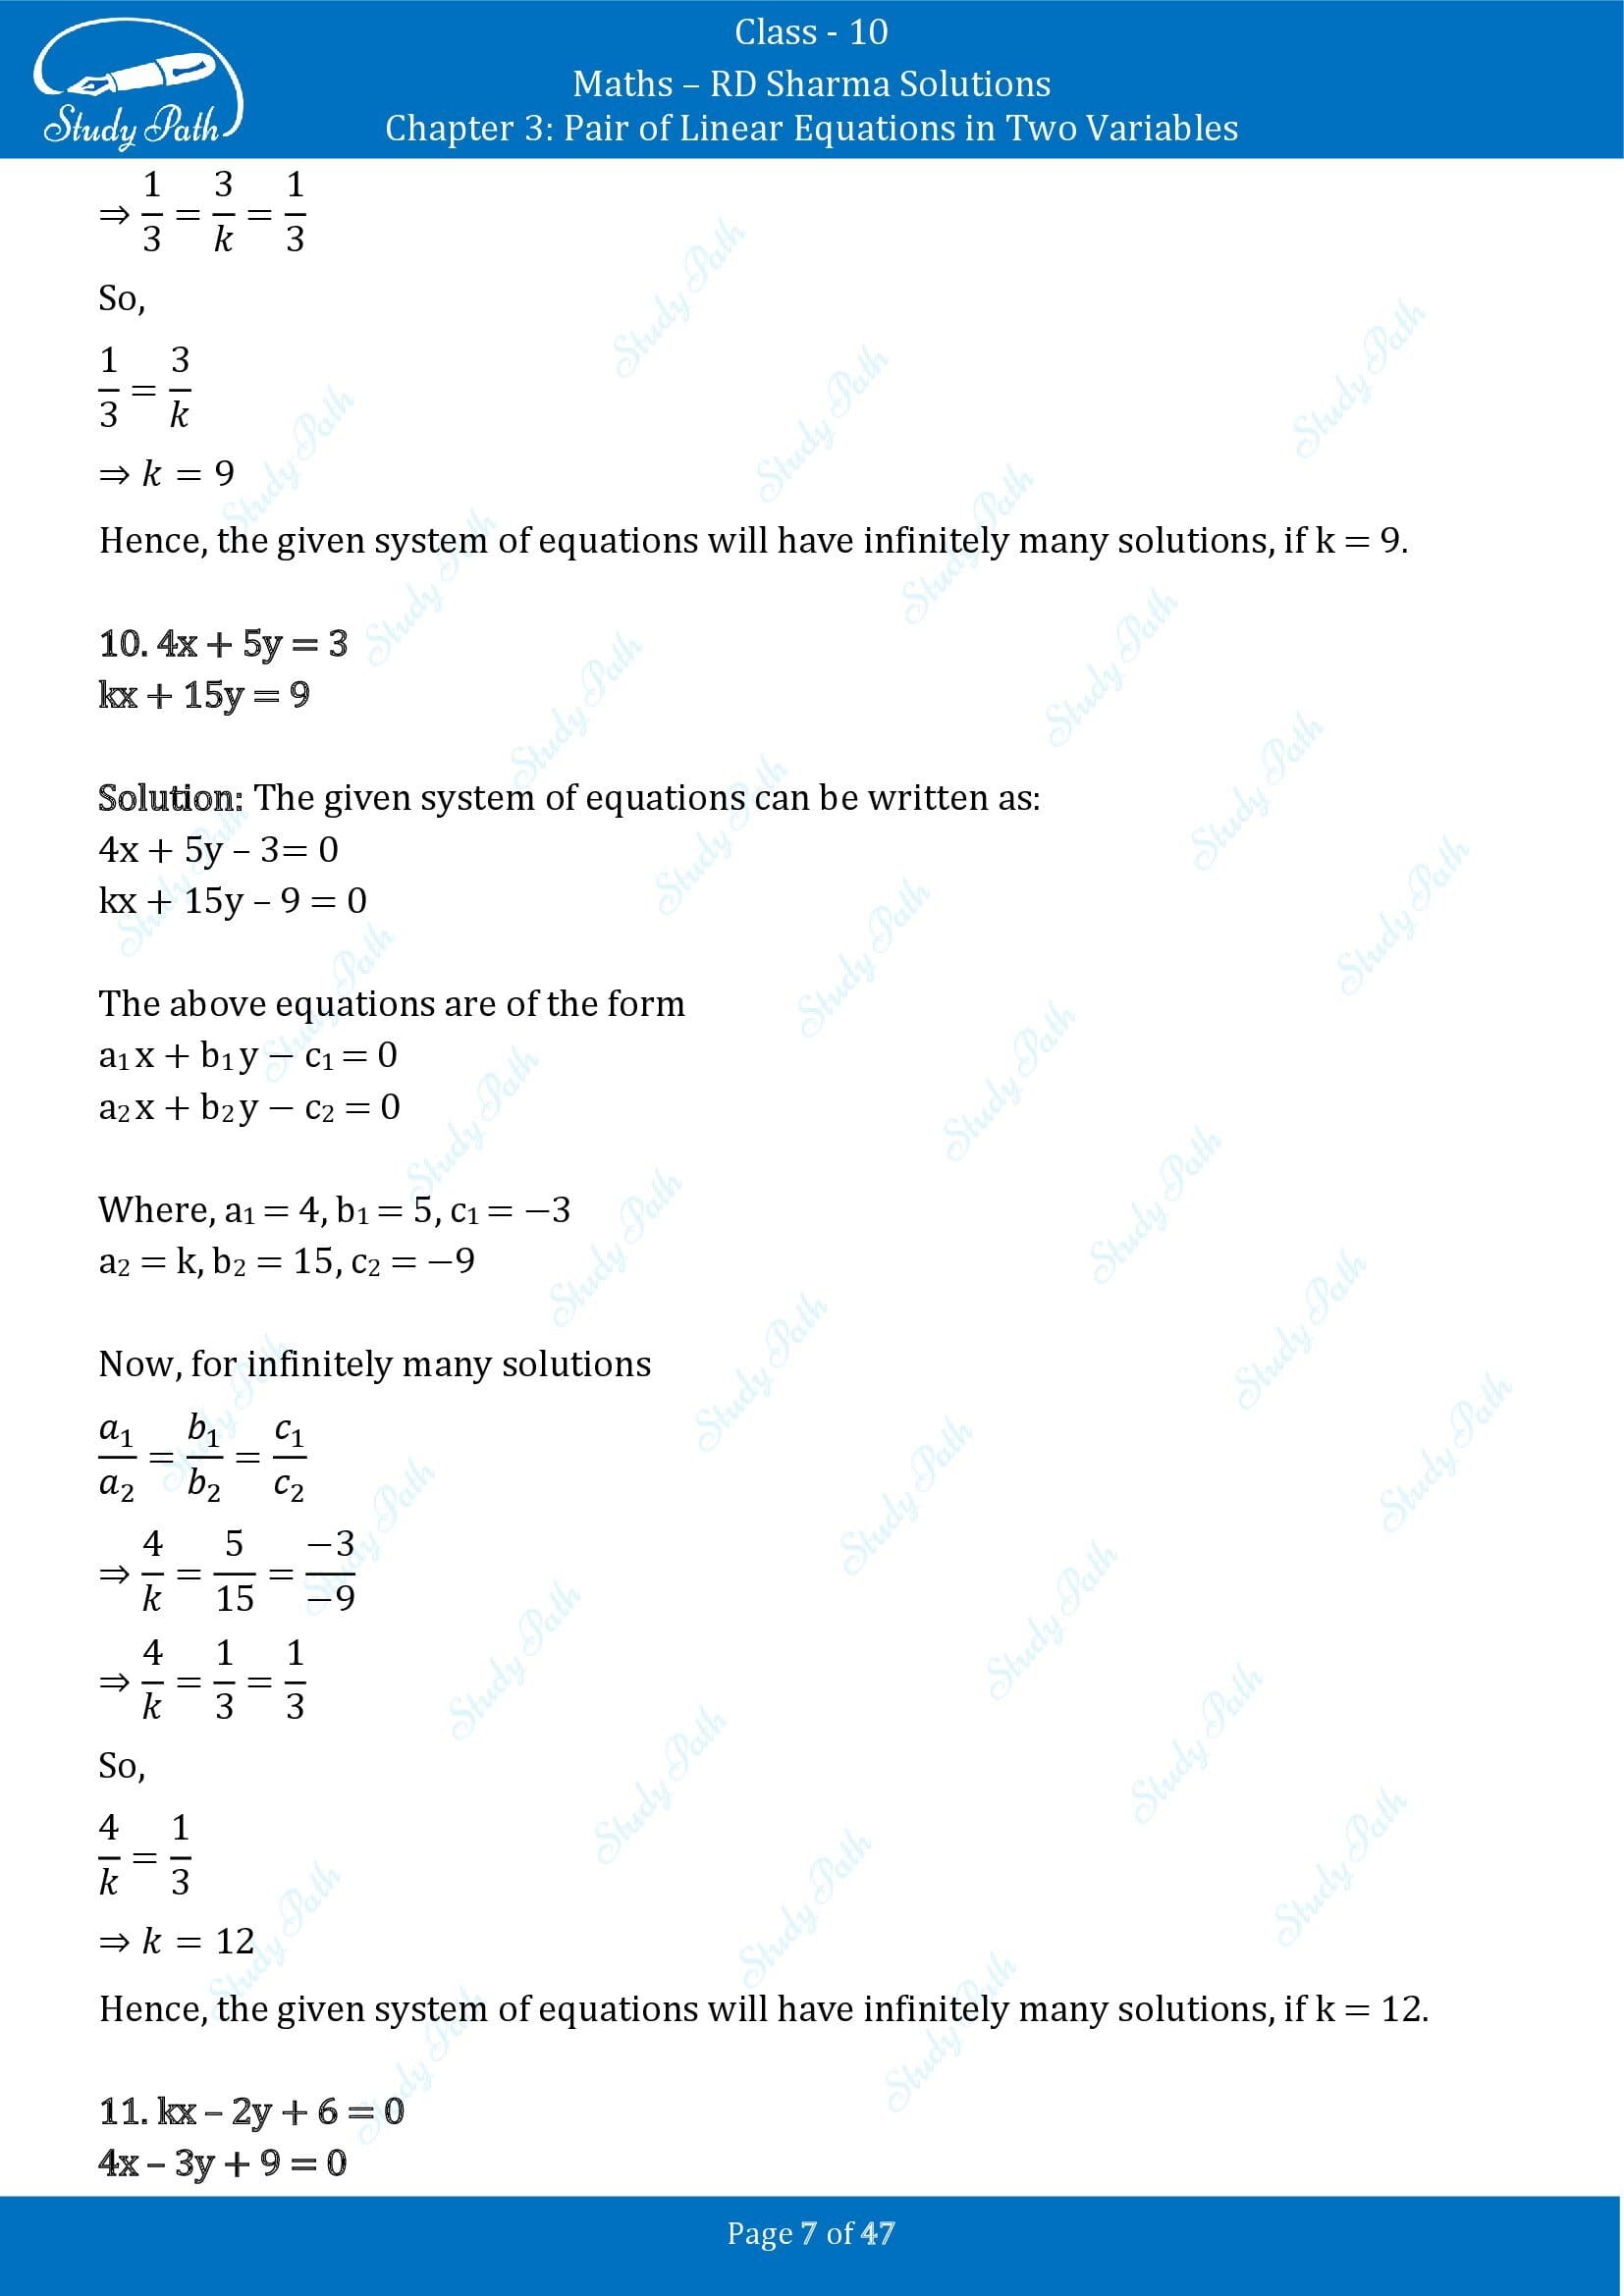 RD Sharma Solutions Class 10 Chapter 3 Pair of Linear Equations in Two Variables Exercise 3.5 00007